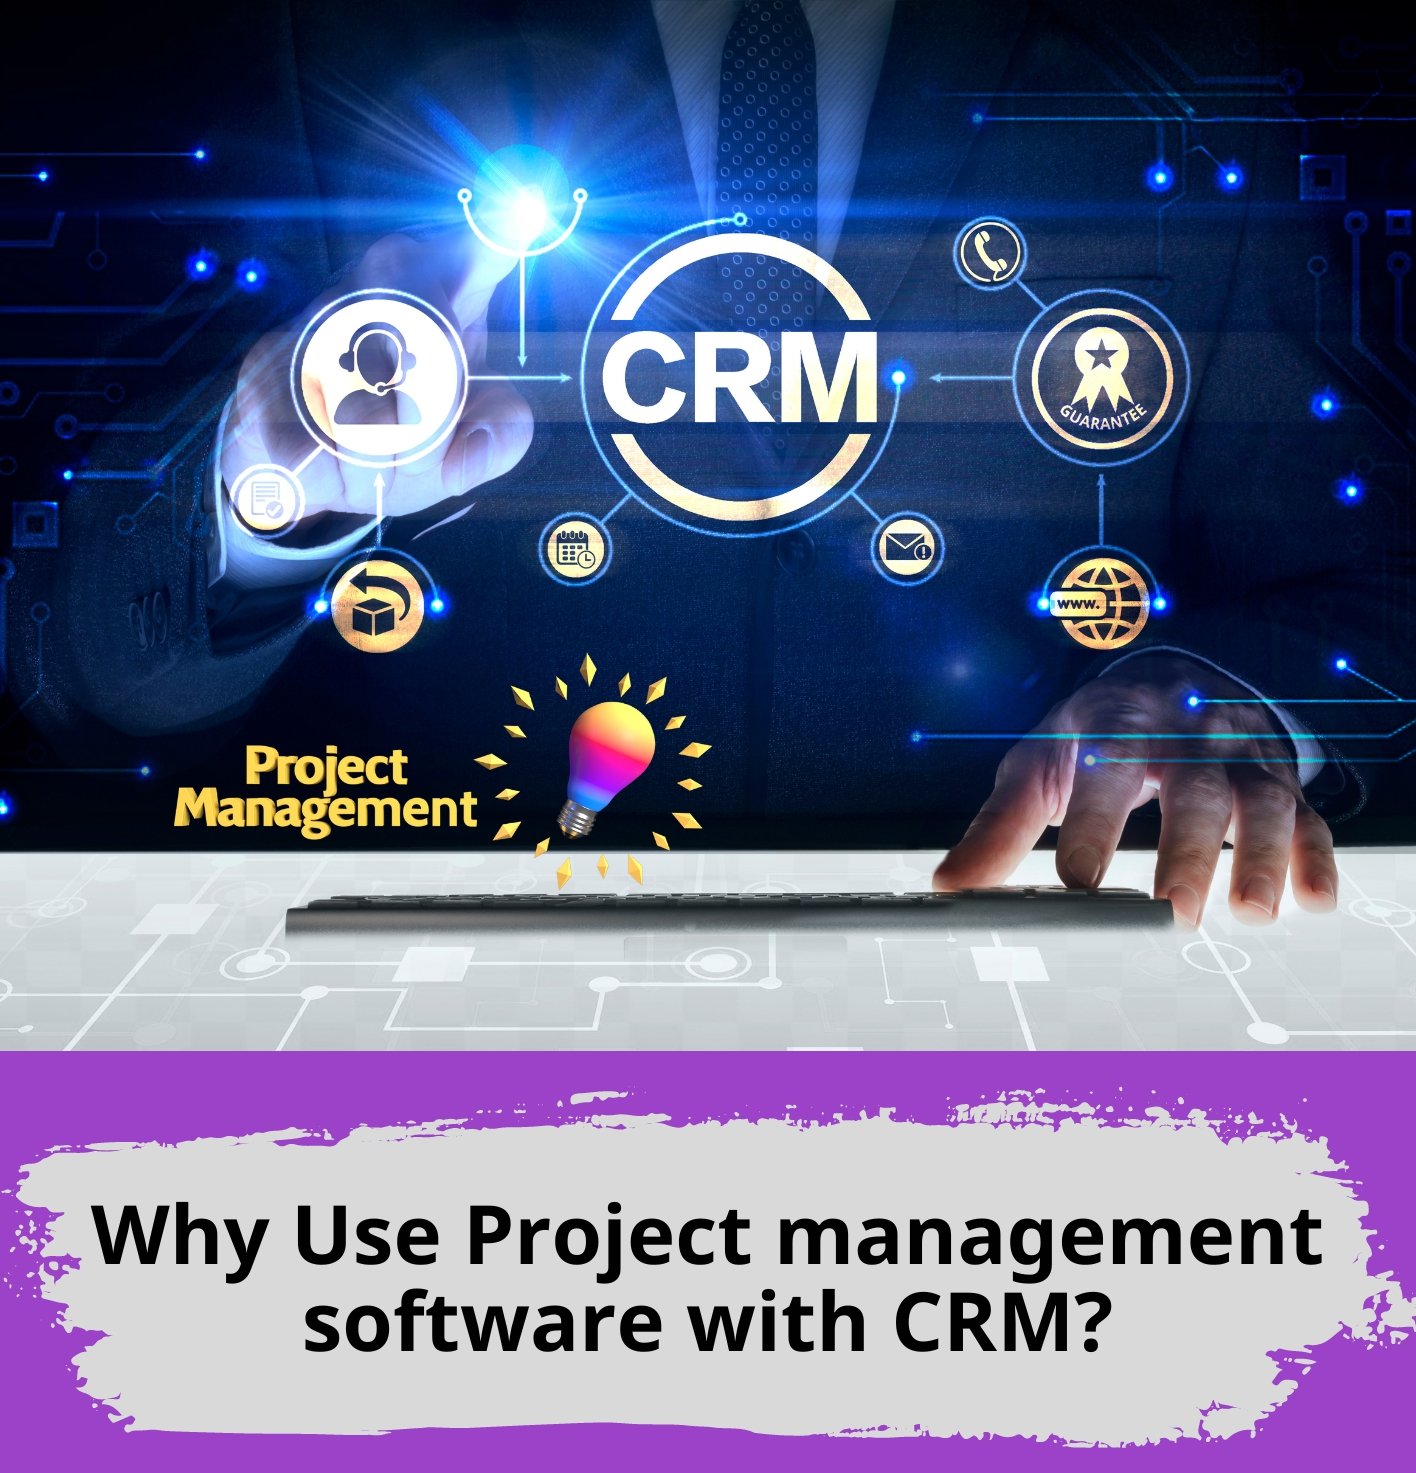 Why Use Project management software with CRM?